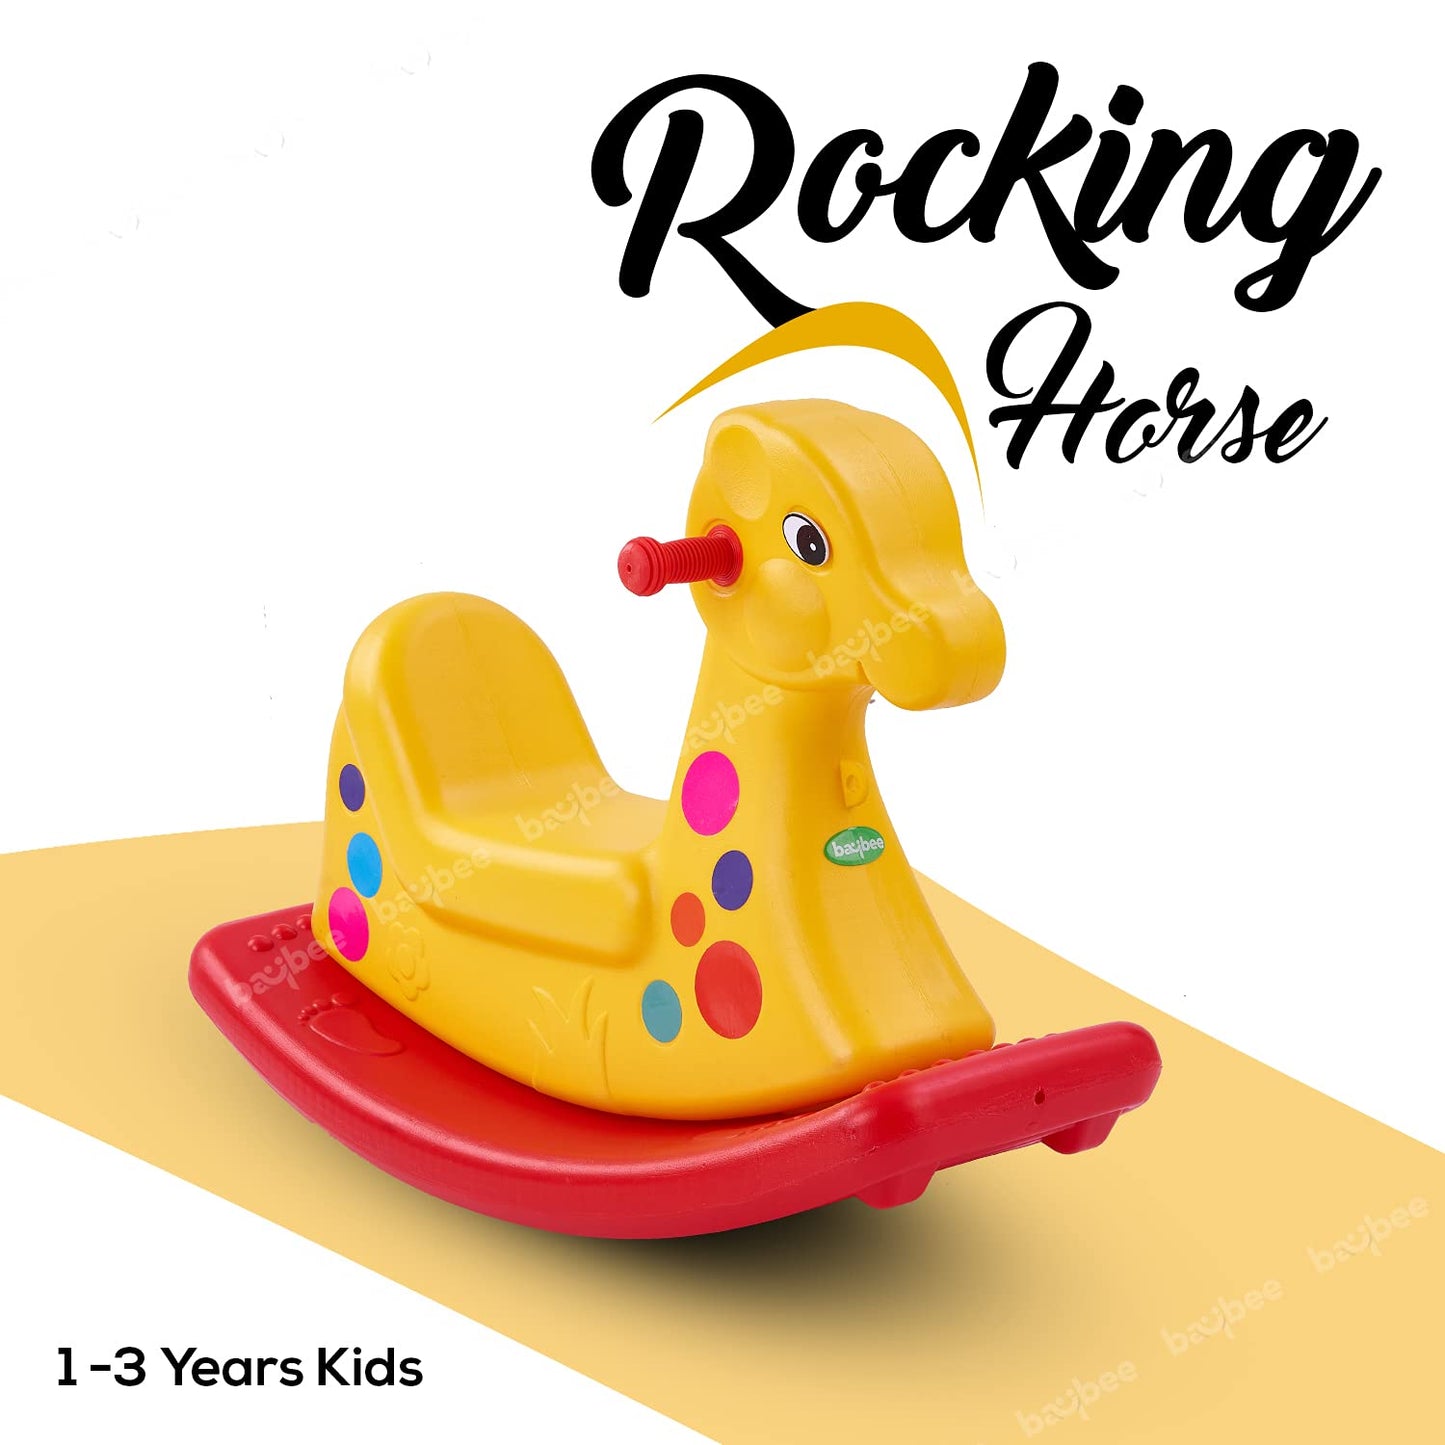 BAYBEE Boy's and Girl's Baby Plastic Horse Ride Rocking Chair